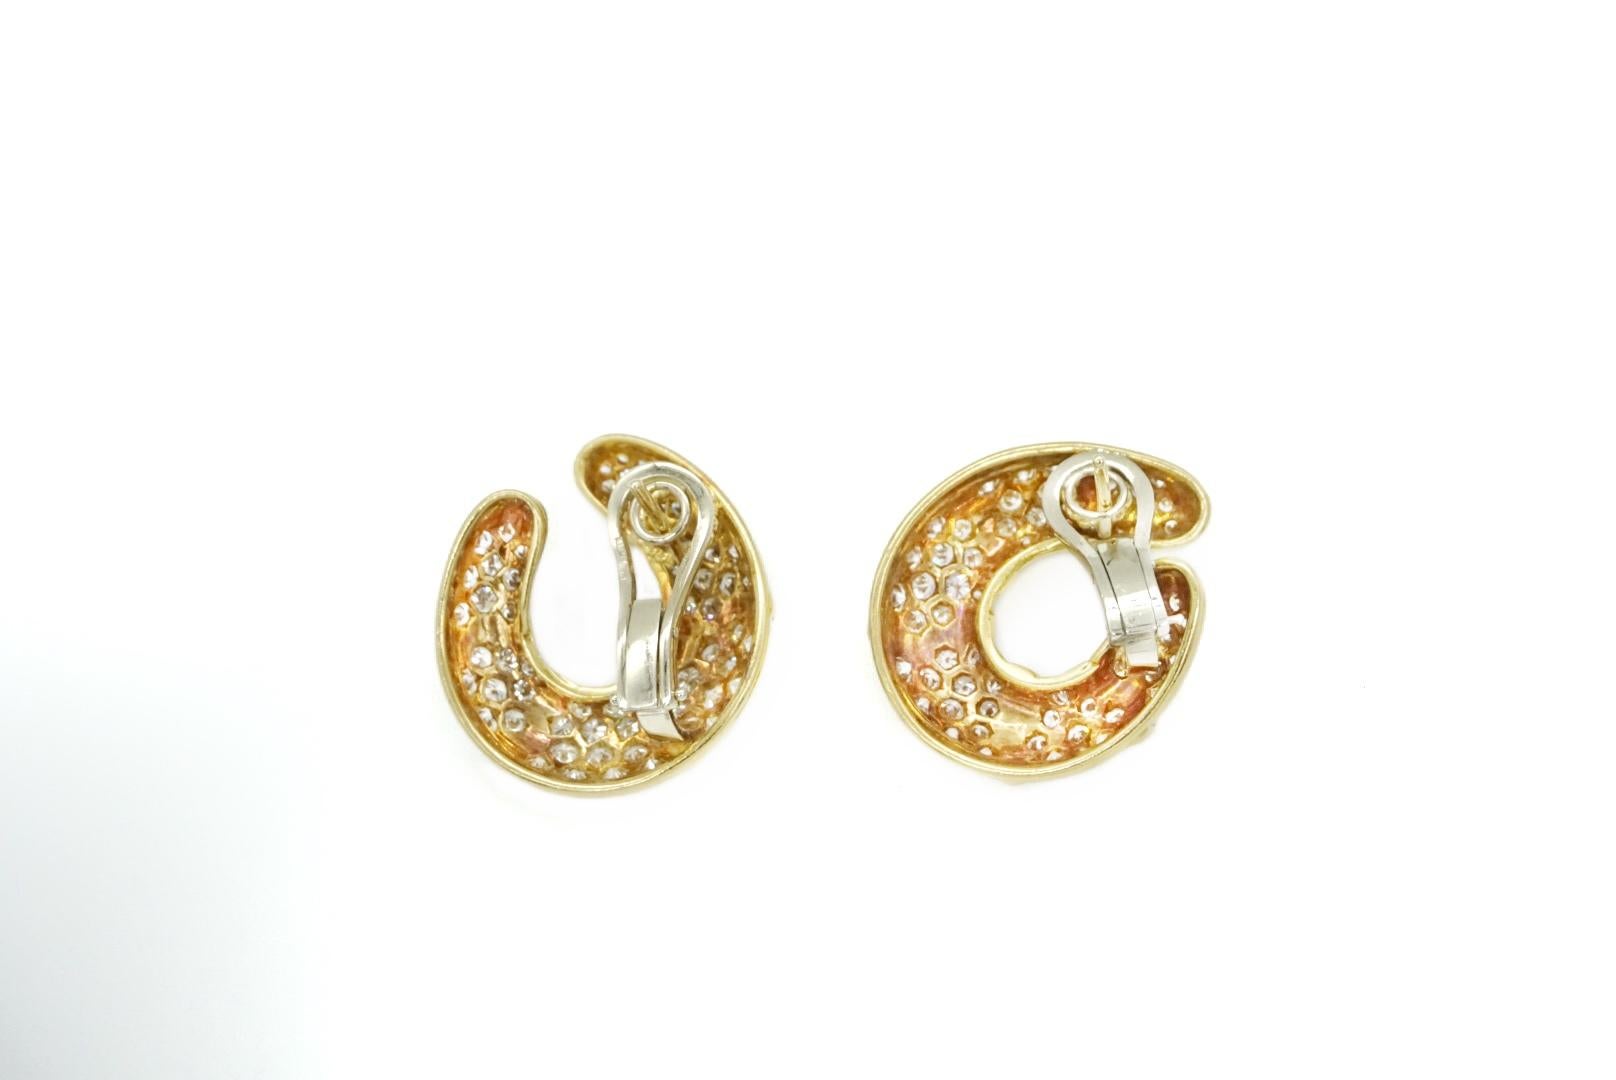 A fine pair of Diamond Earrings in 18k Yellow Gold with 122 Diamonds Weighing 10.00 cts. Made in the USA, circa 1970.
F-G Color VVS-VS Clarity 
Gold Weight: 29.70 gm